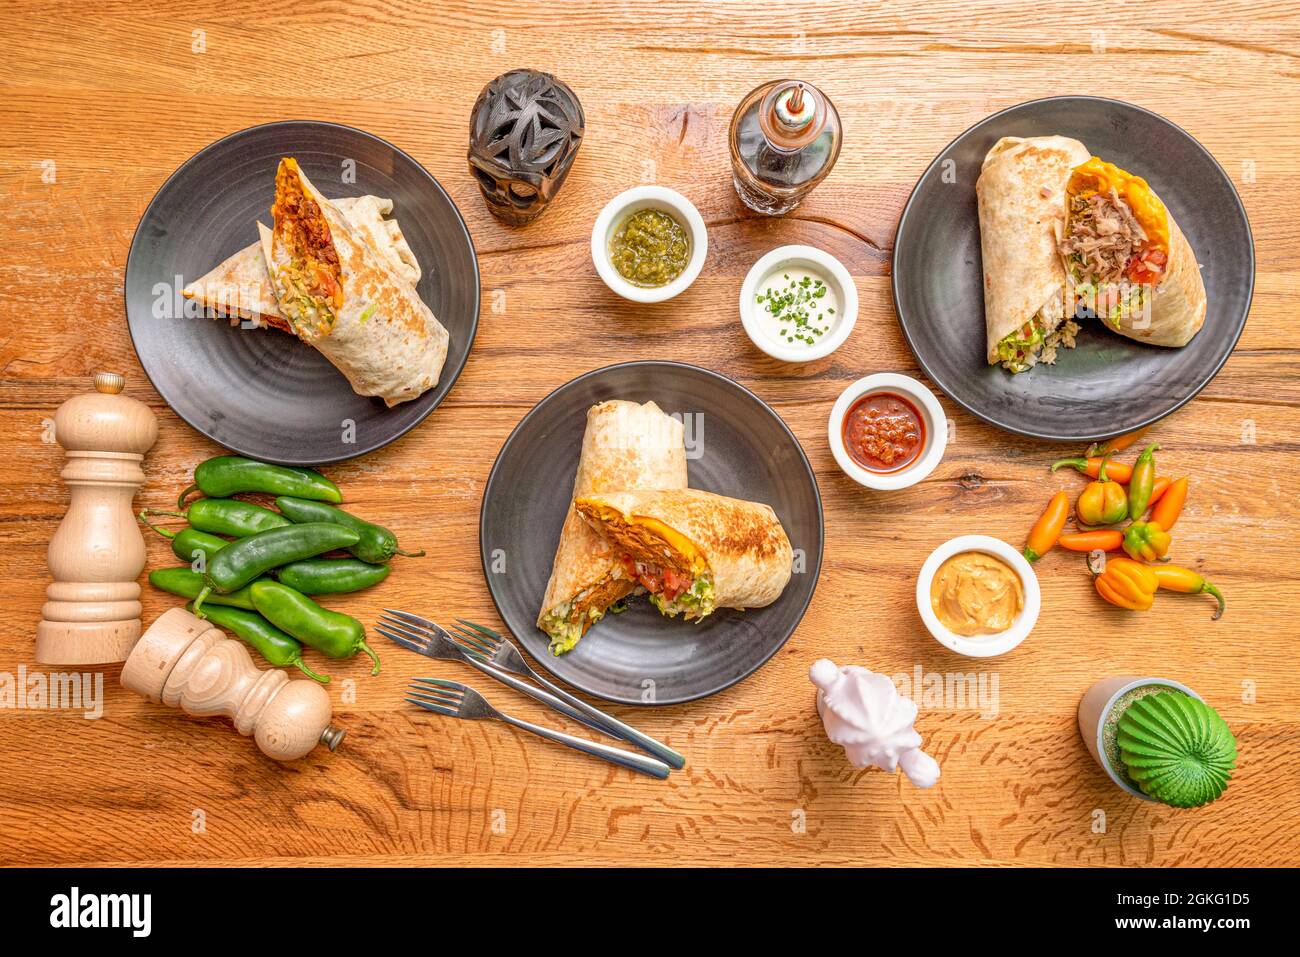 Top view image of Mexican burritos with peppers, sauces, fresh pepper, black skull and forks Stock Photo